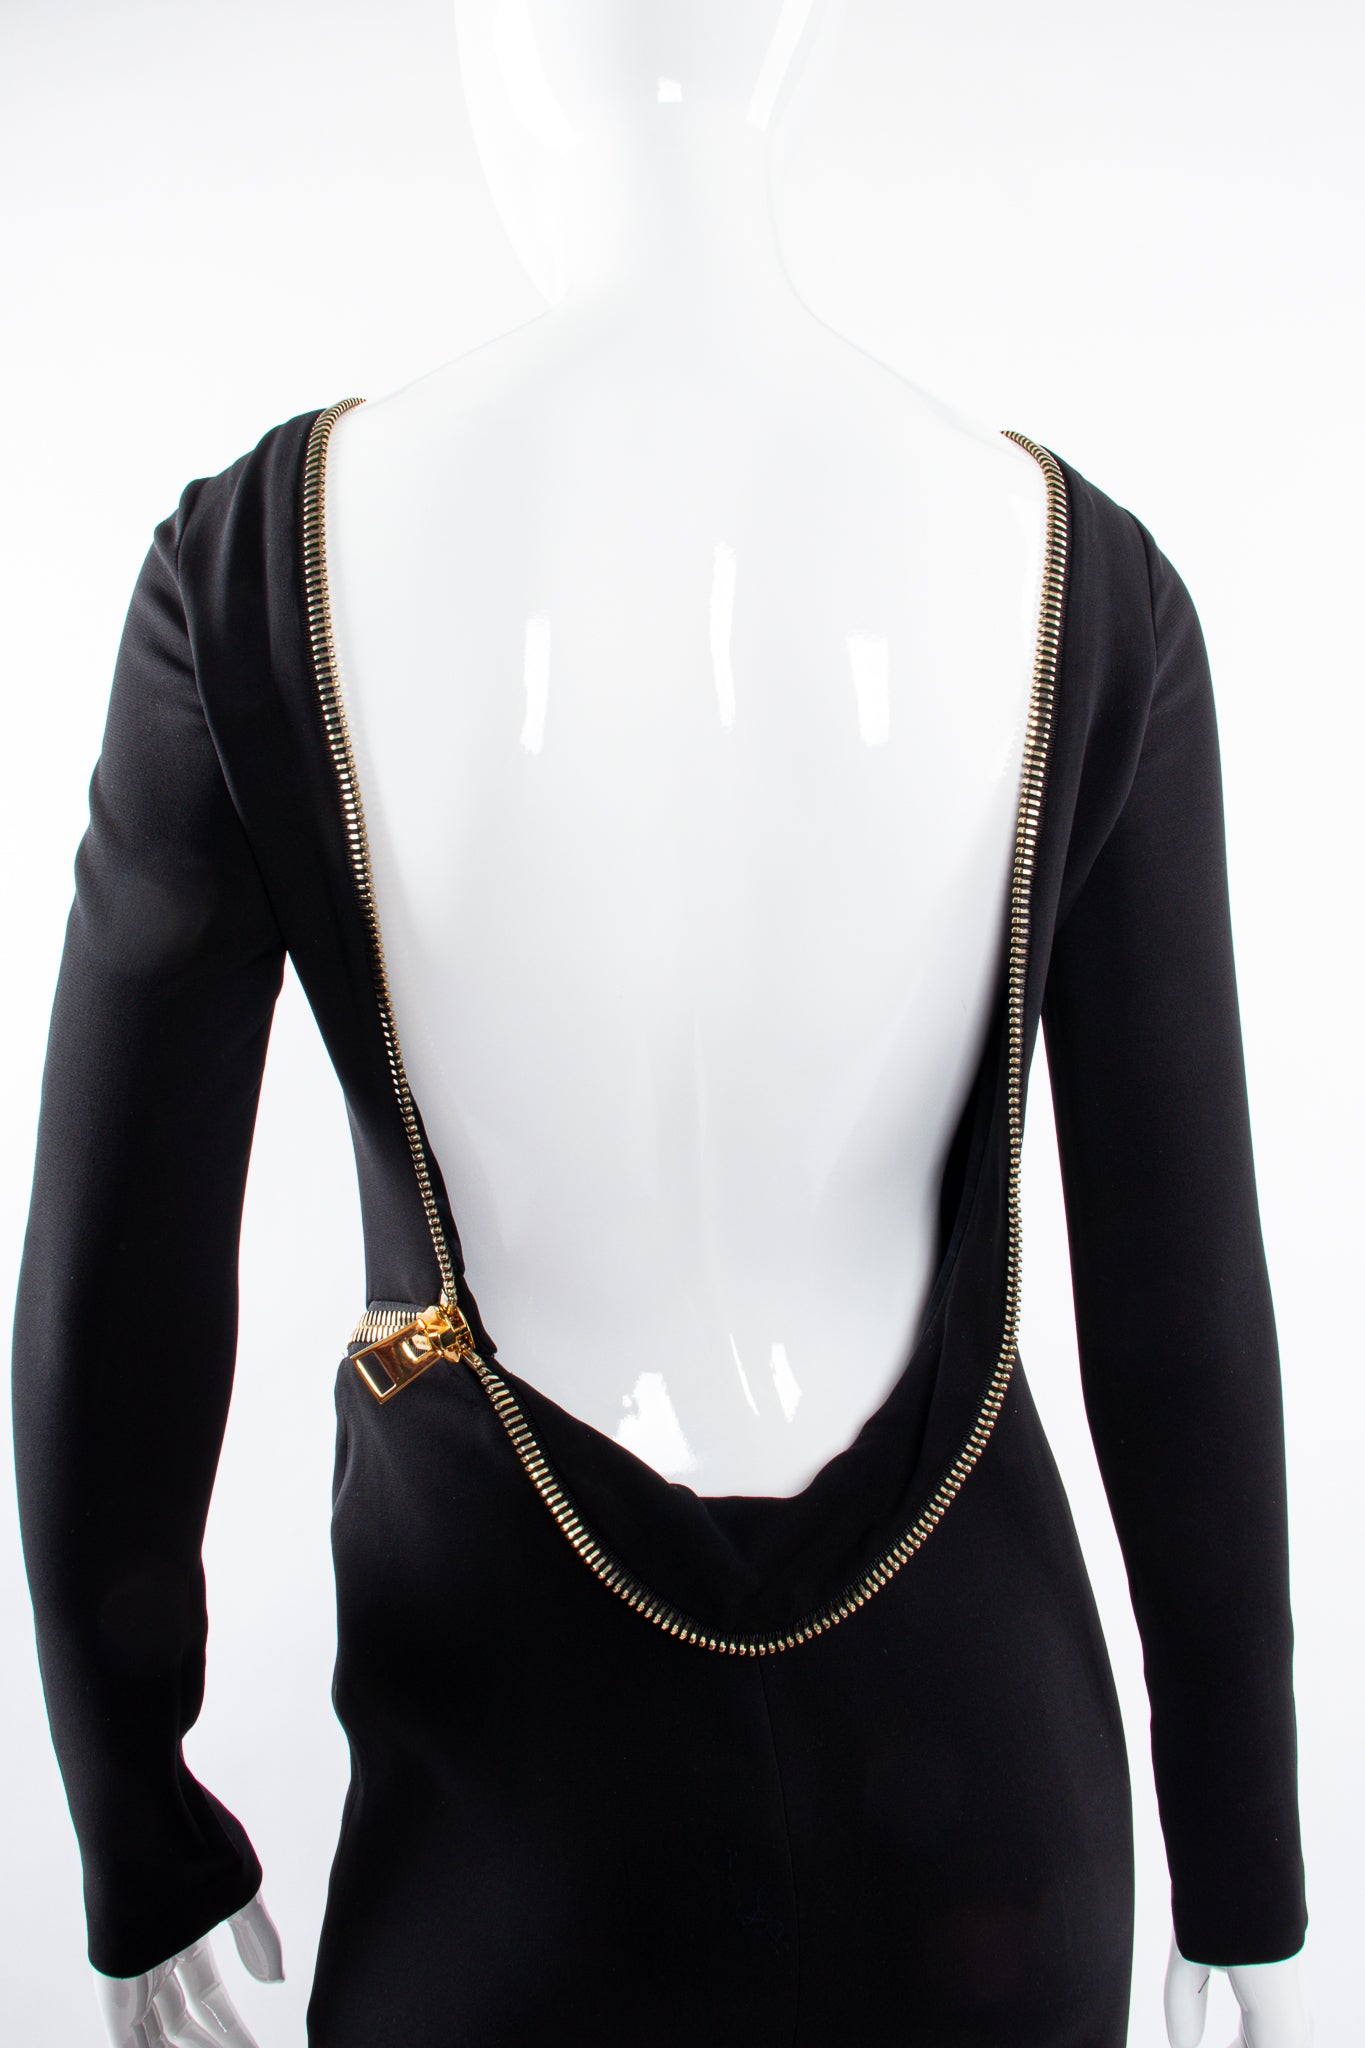 Vintage Tom Ford AW 2012 Plunge Back Zipper Gown on Mannequin back crop at Recess Los Angeles